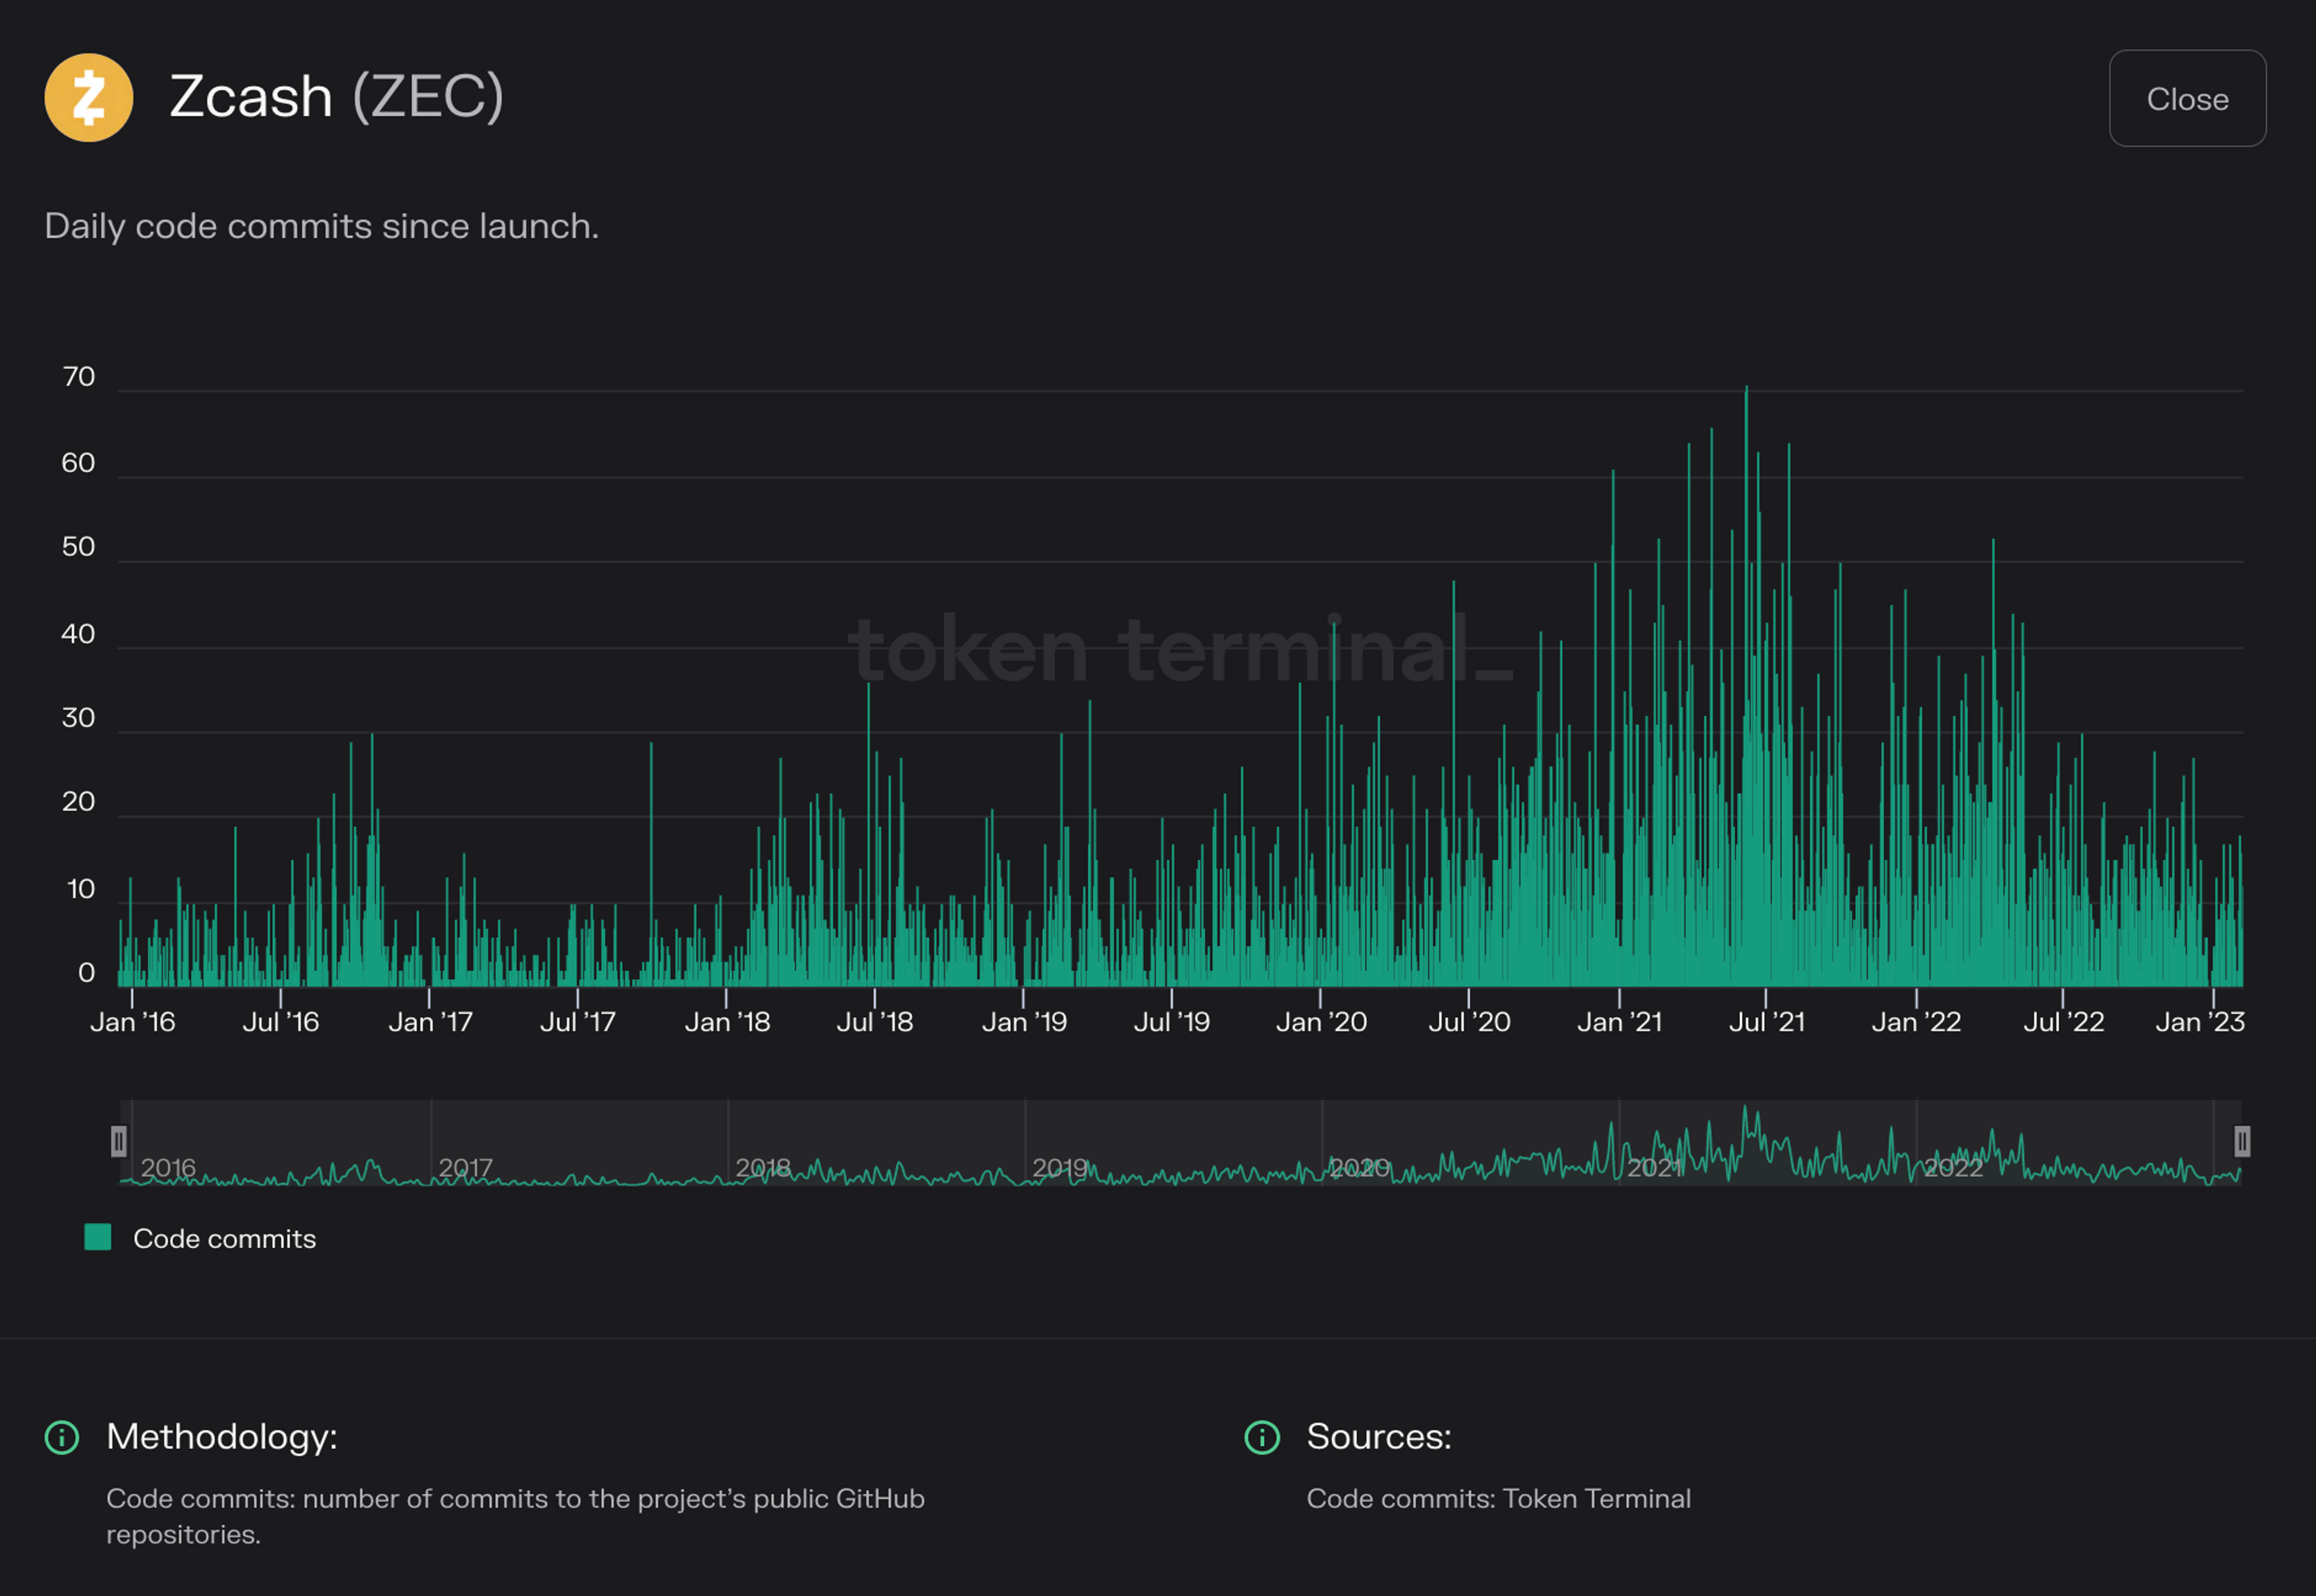 Chart of Zcash daily code commits